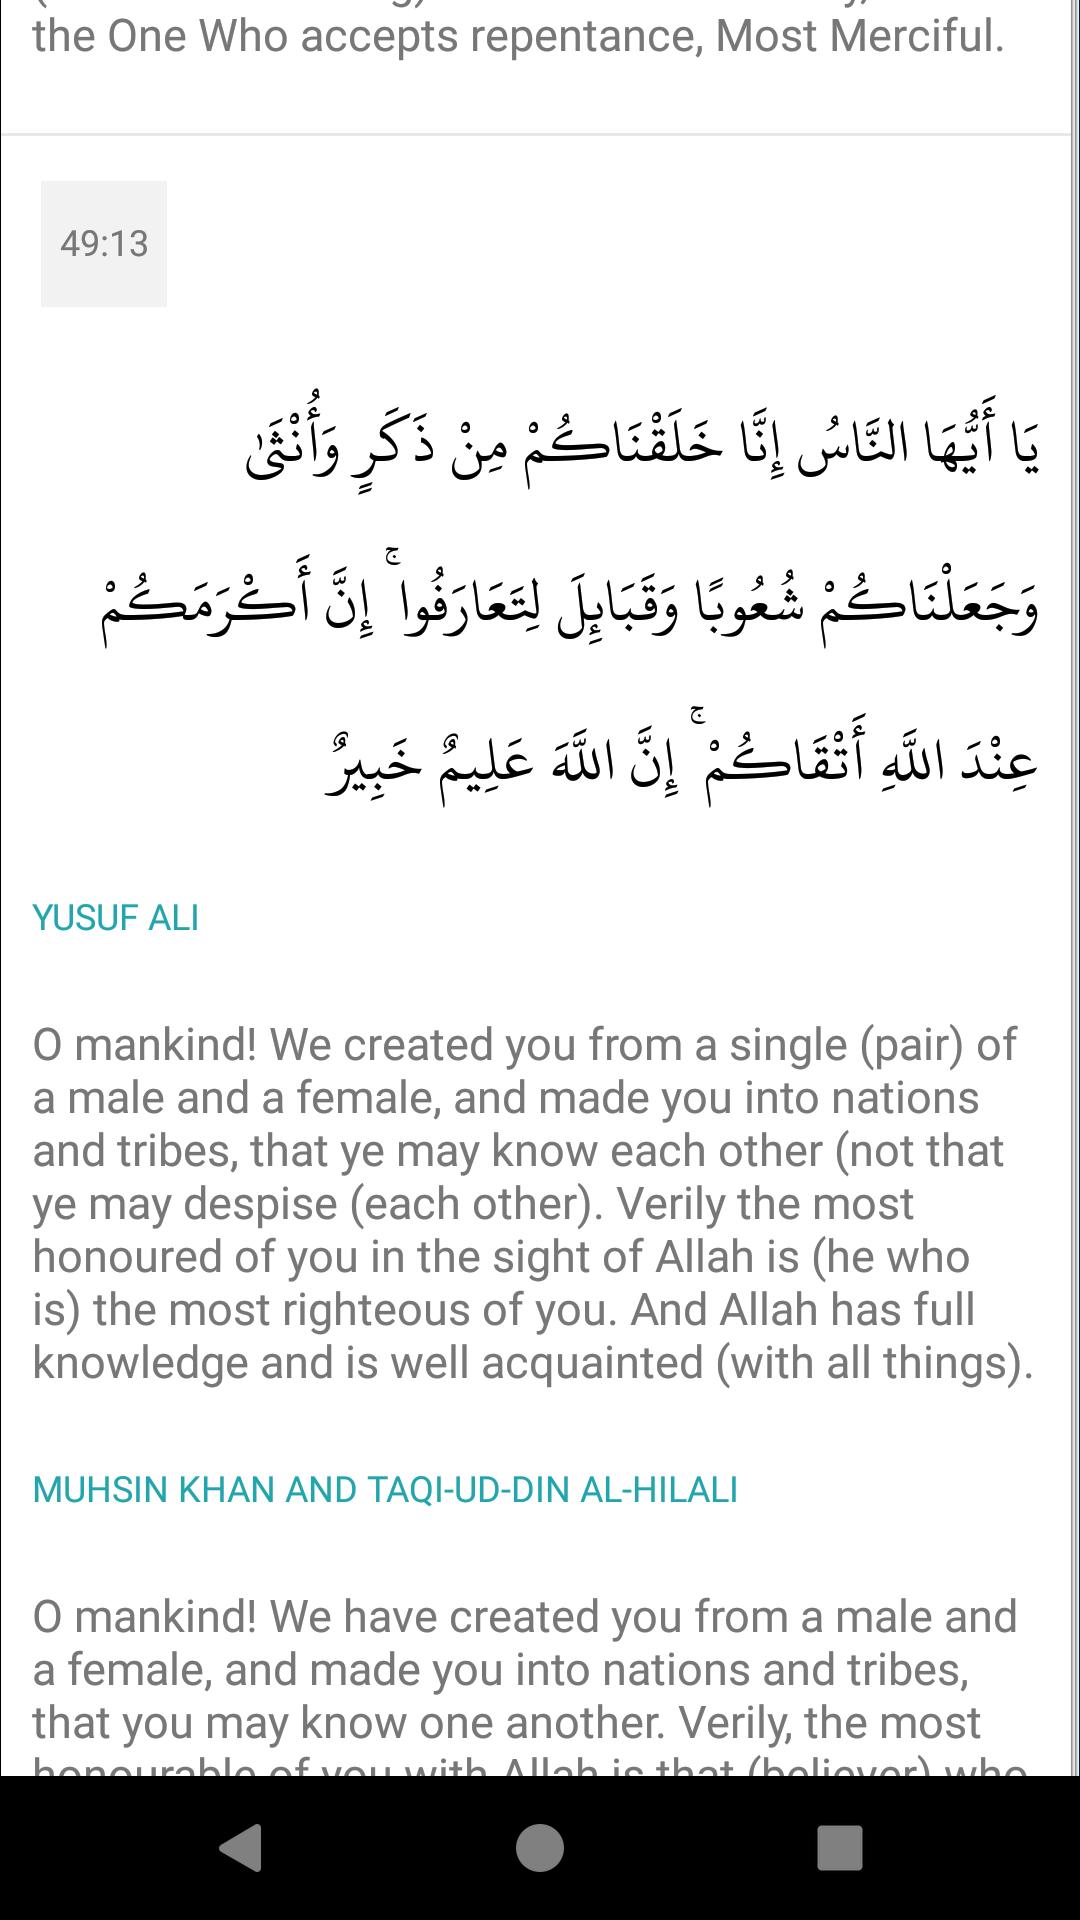 Quran for Android 3.0.2 Screenshot 6